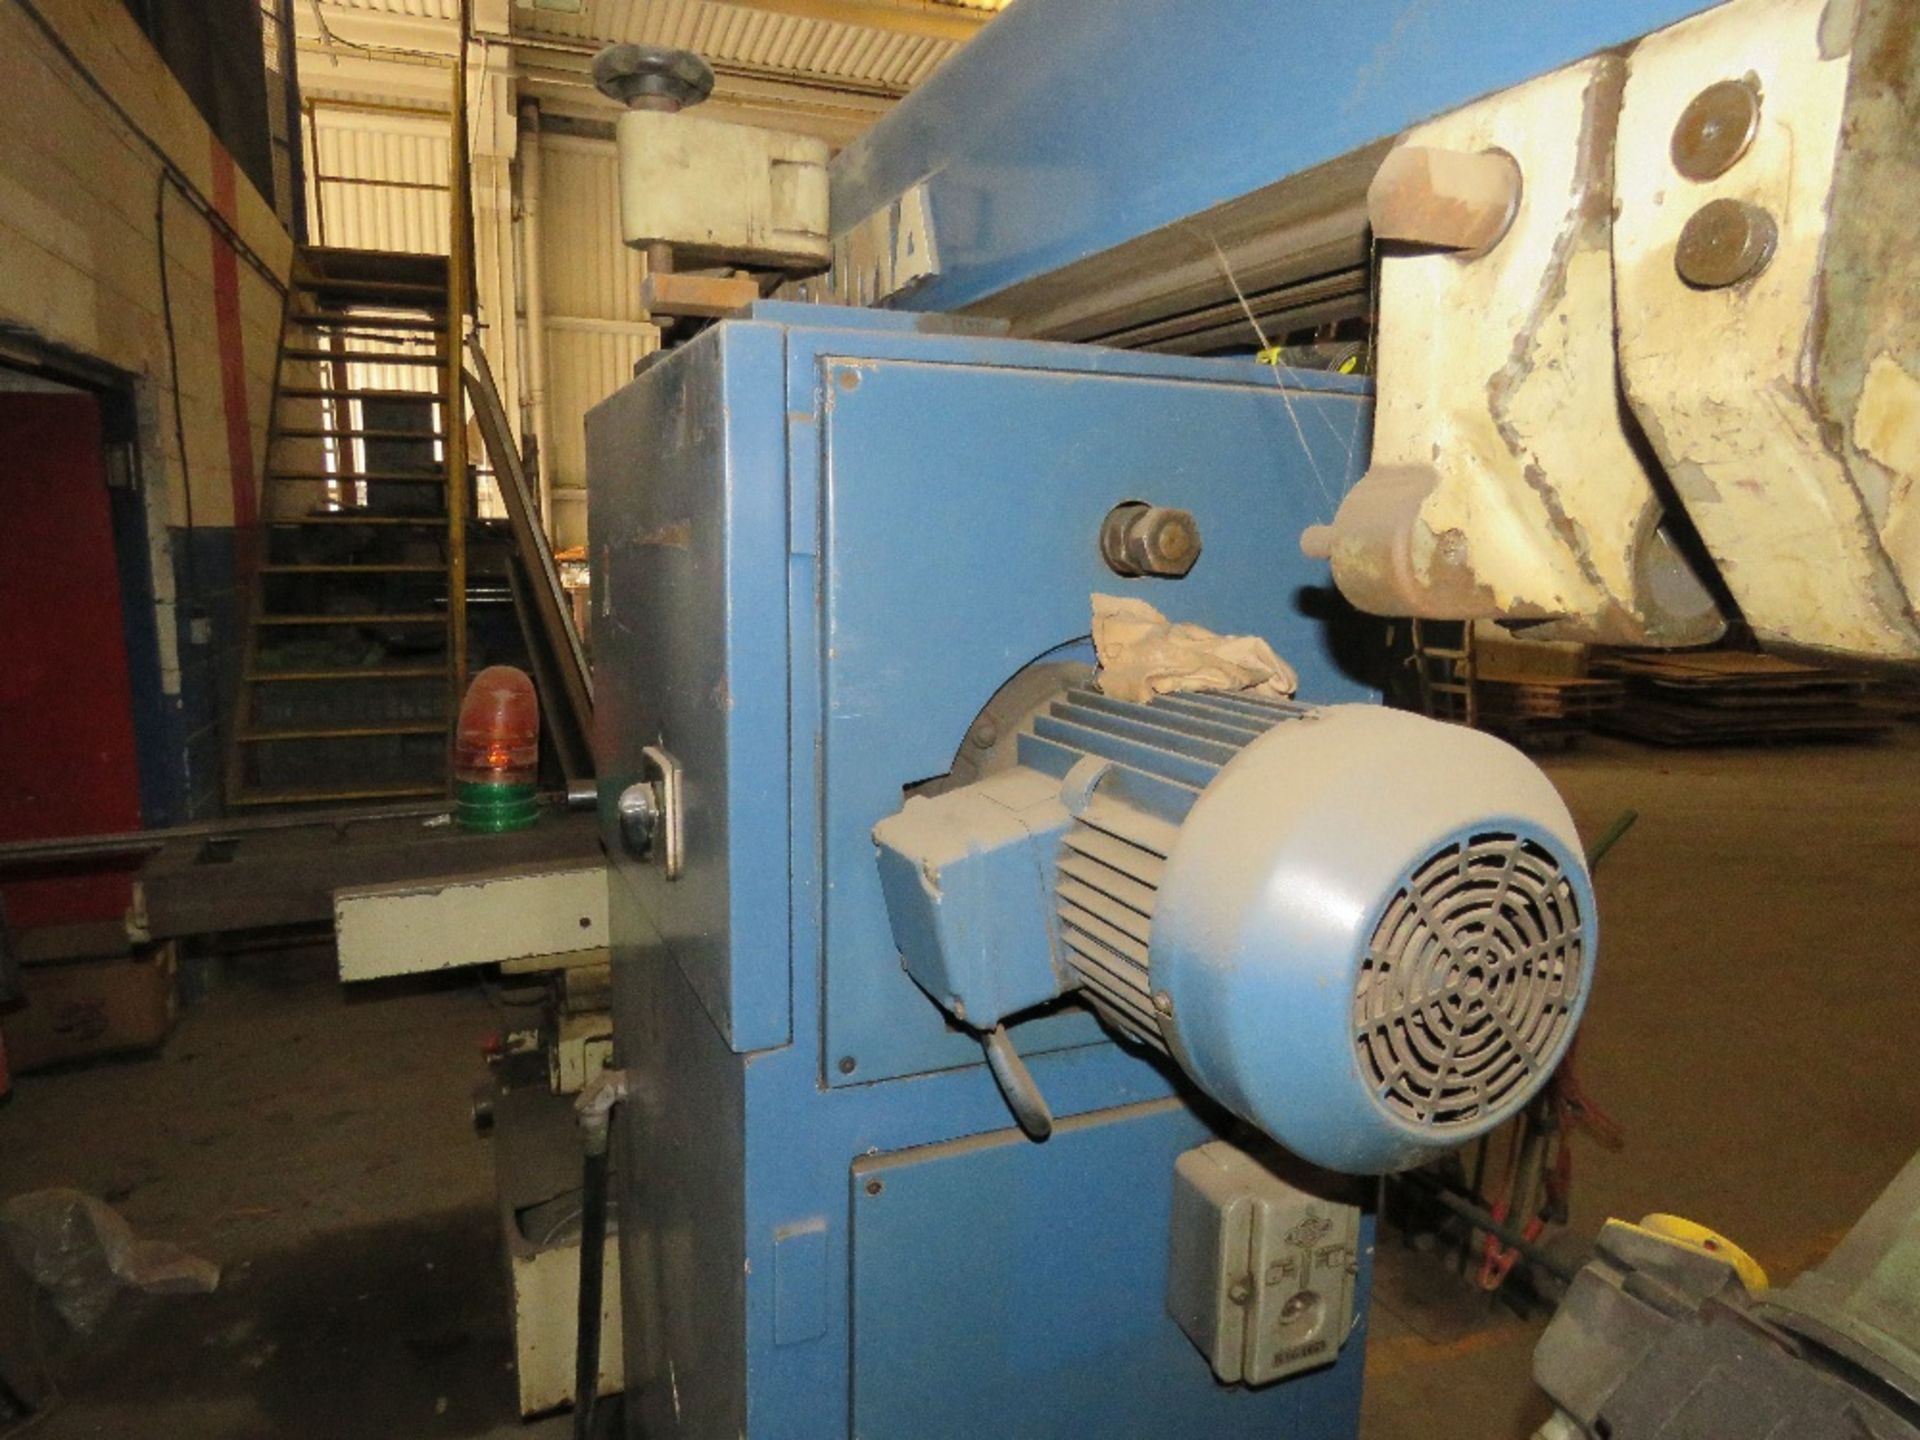 INDUMA UNIVERSAL MILLING MACHINE. LOT LOCATION: SS13 1EF, BASILDON, ESSEX. THIS LOT IS SOLD UNDER - Image 10 of 10